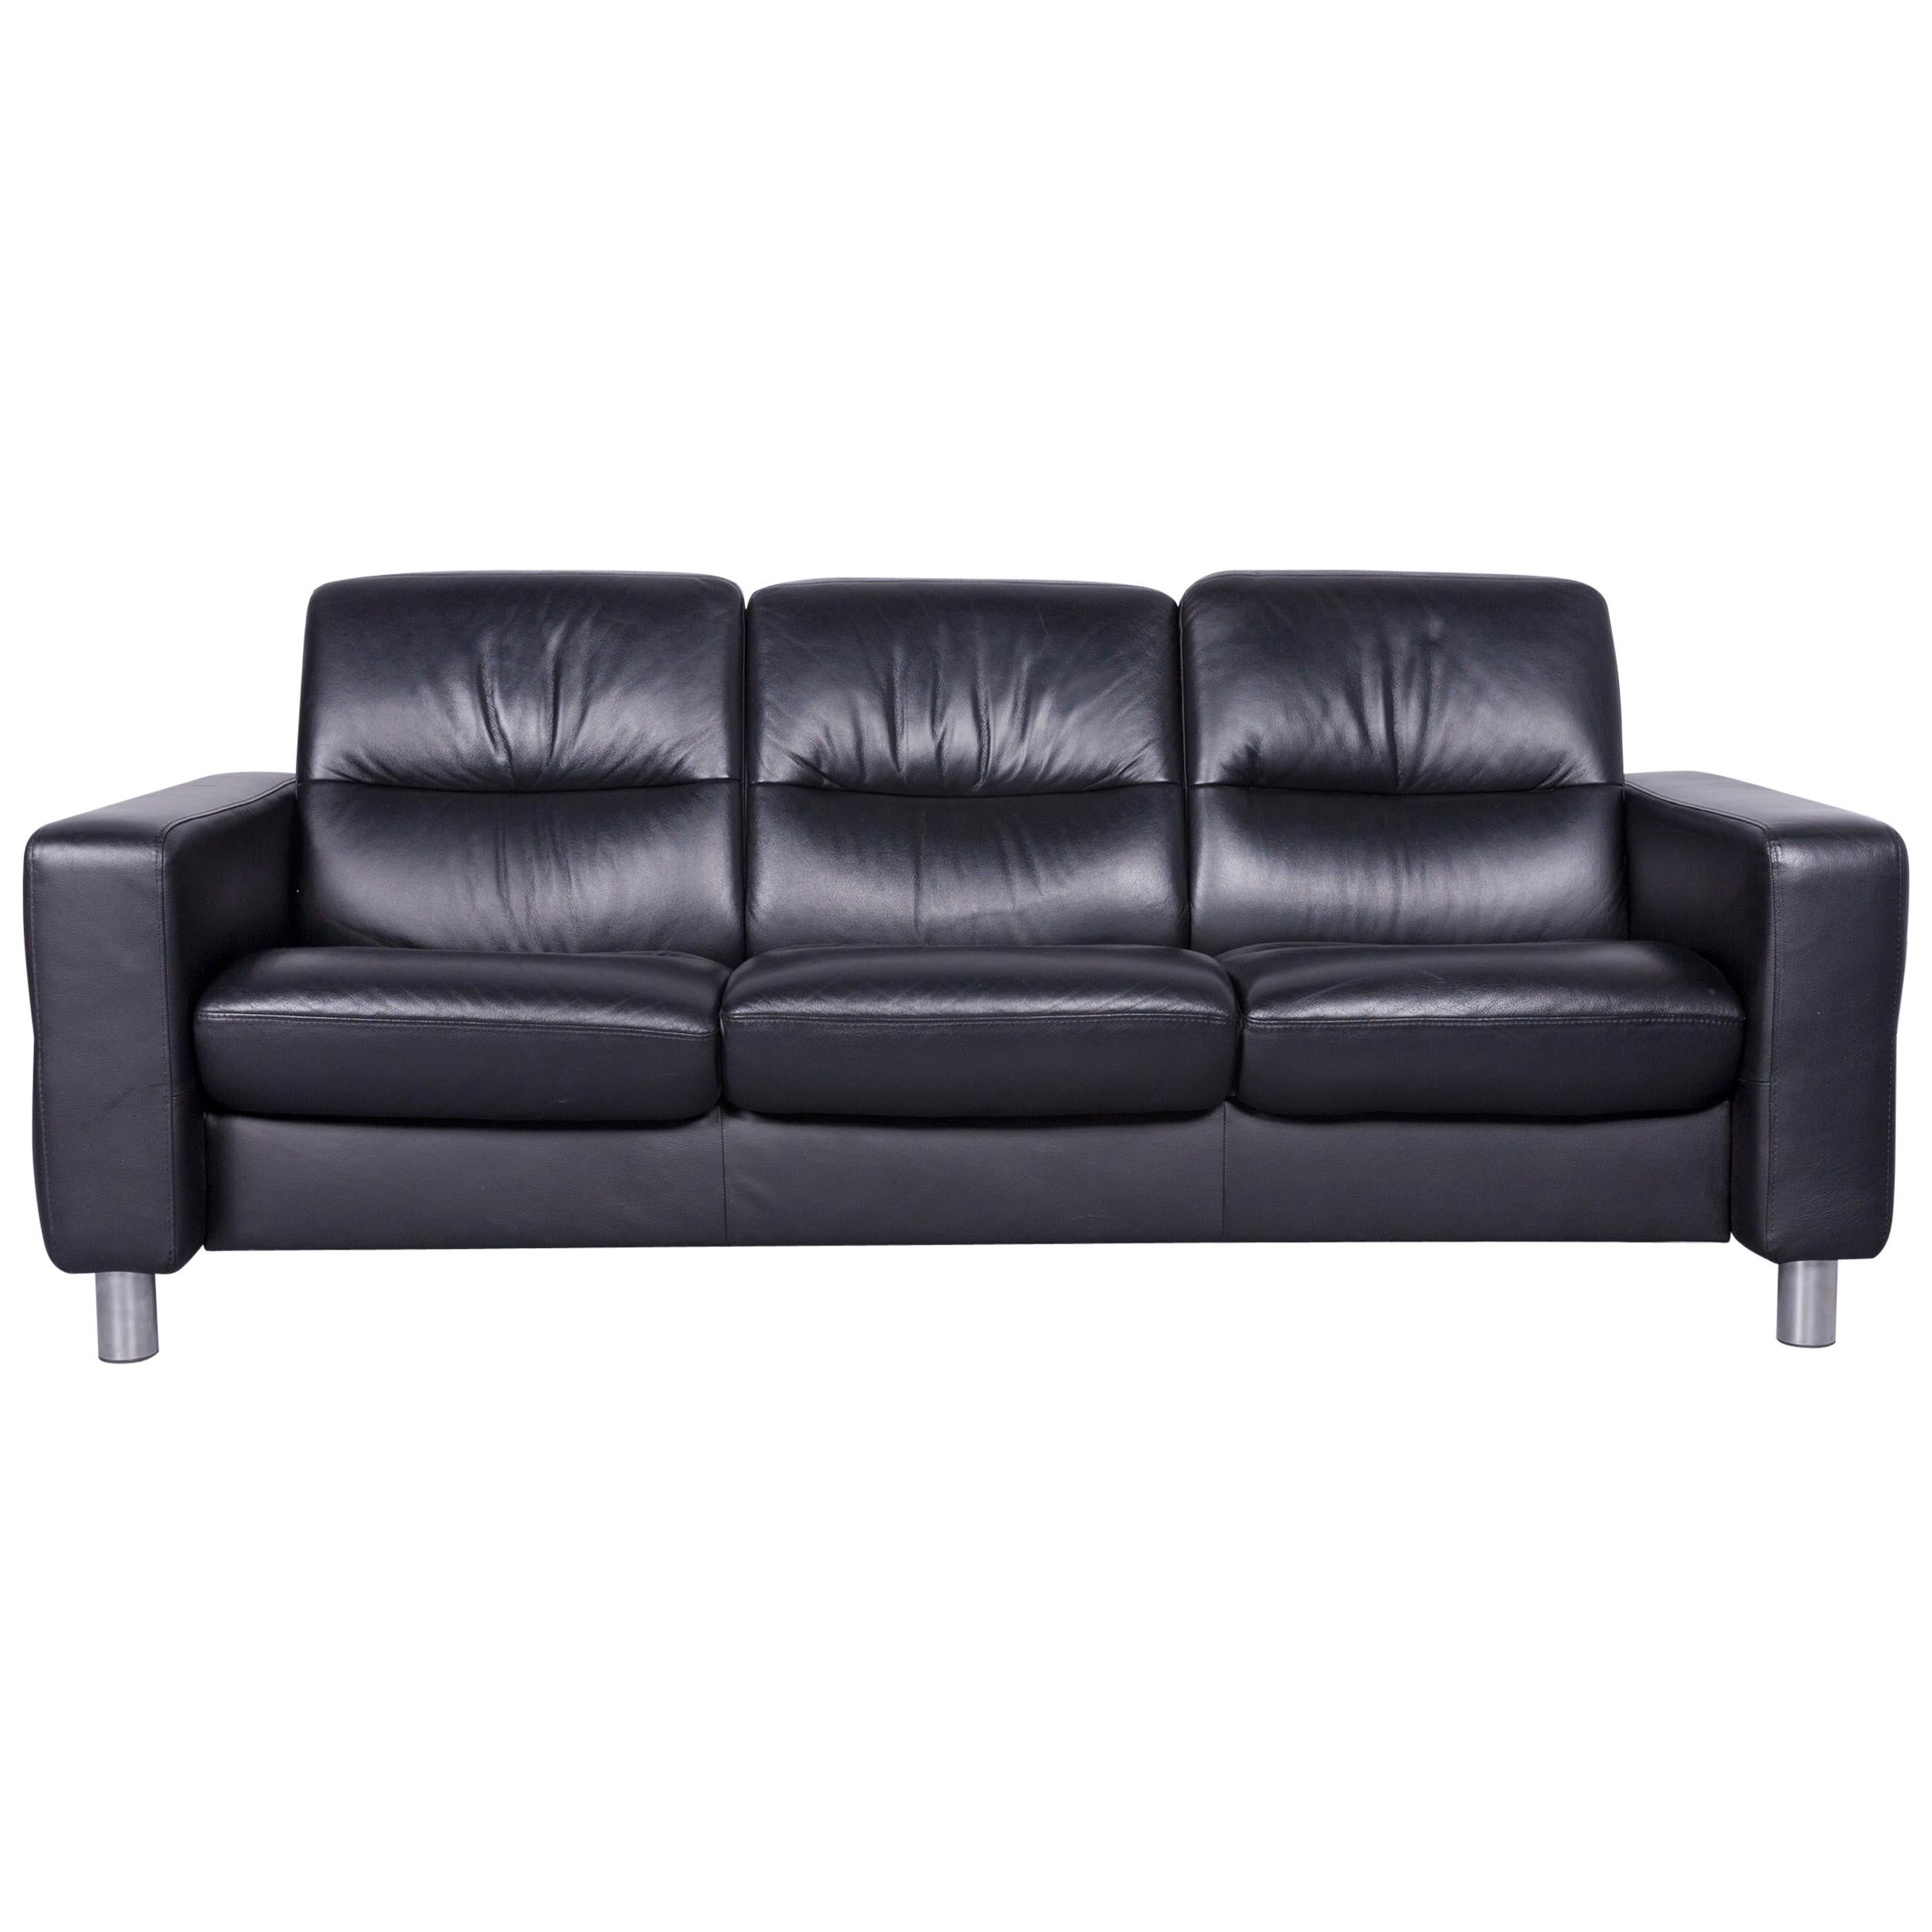 Ekornes Stressless Relax Sofa Black Leather TV Recliner Three-Seat For Sale